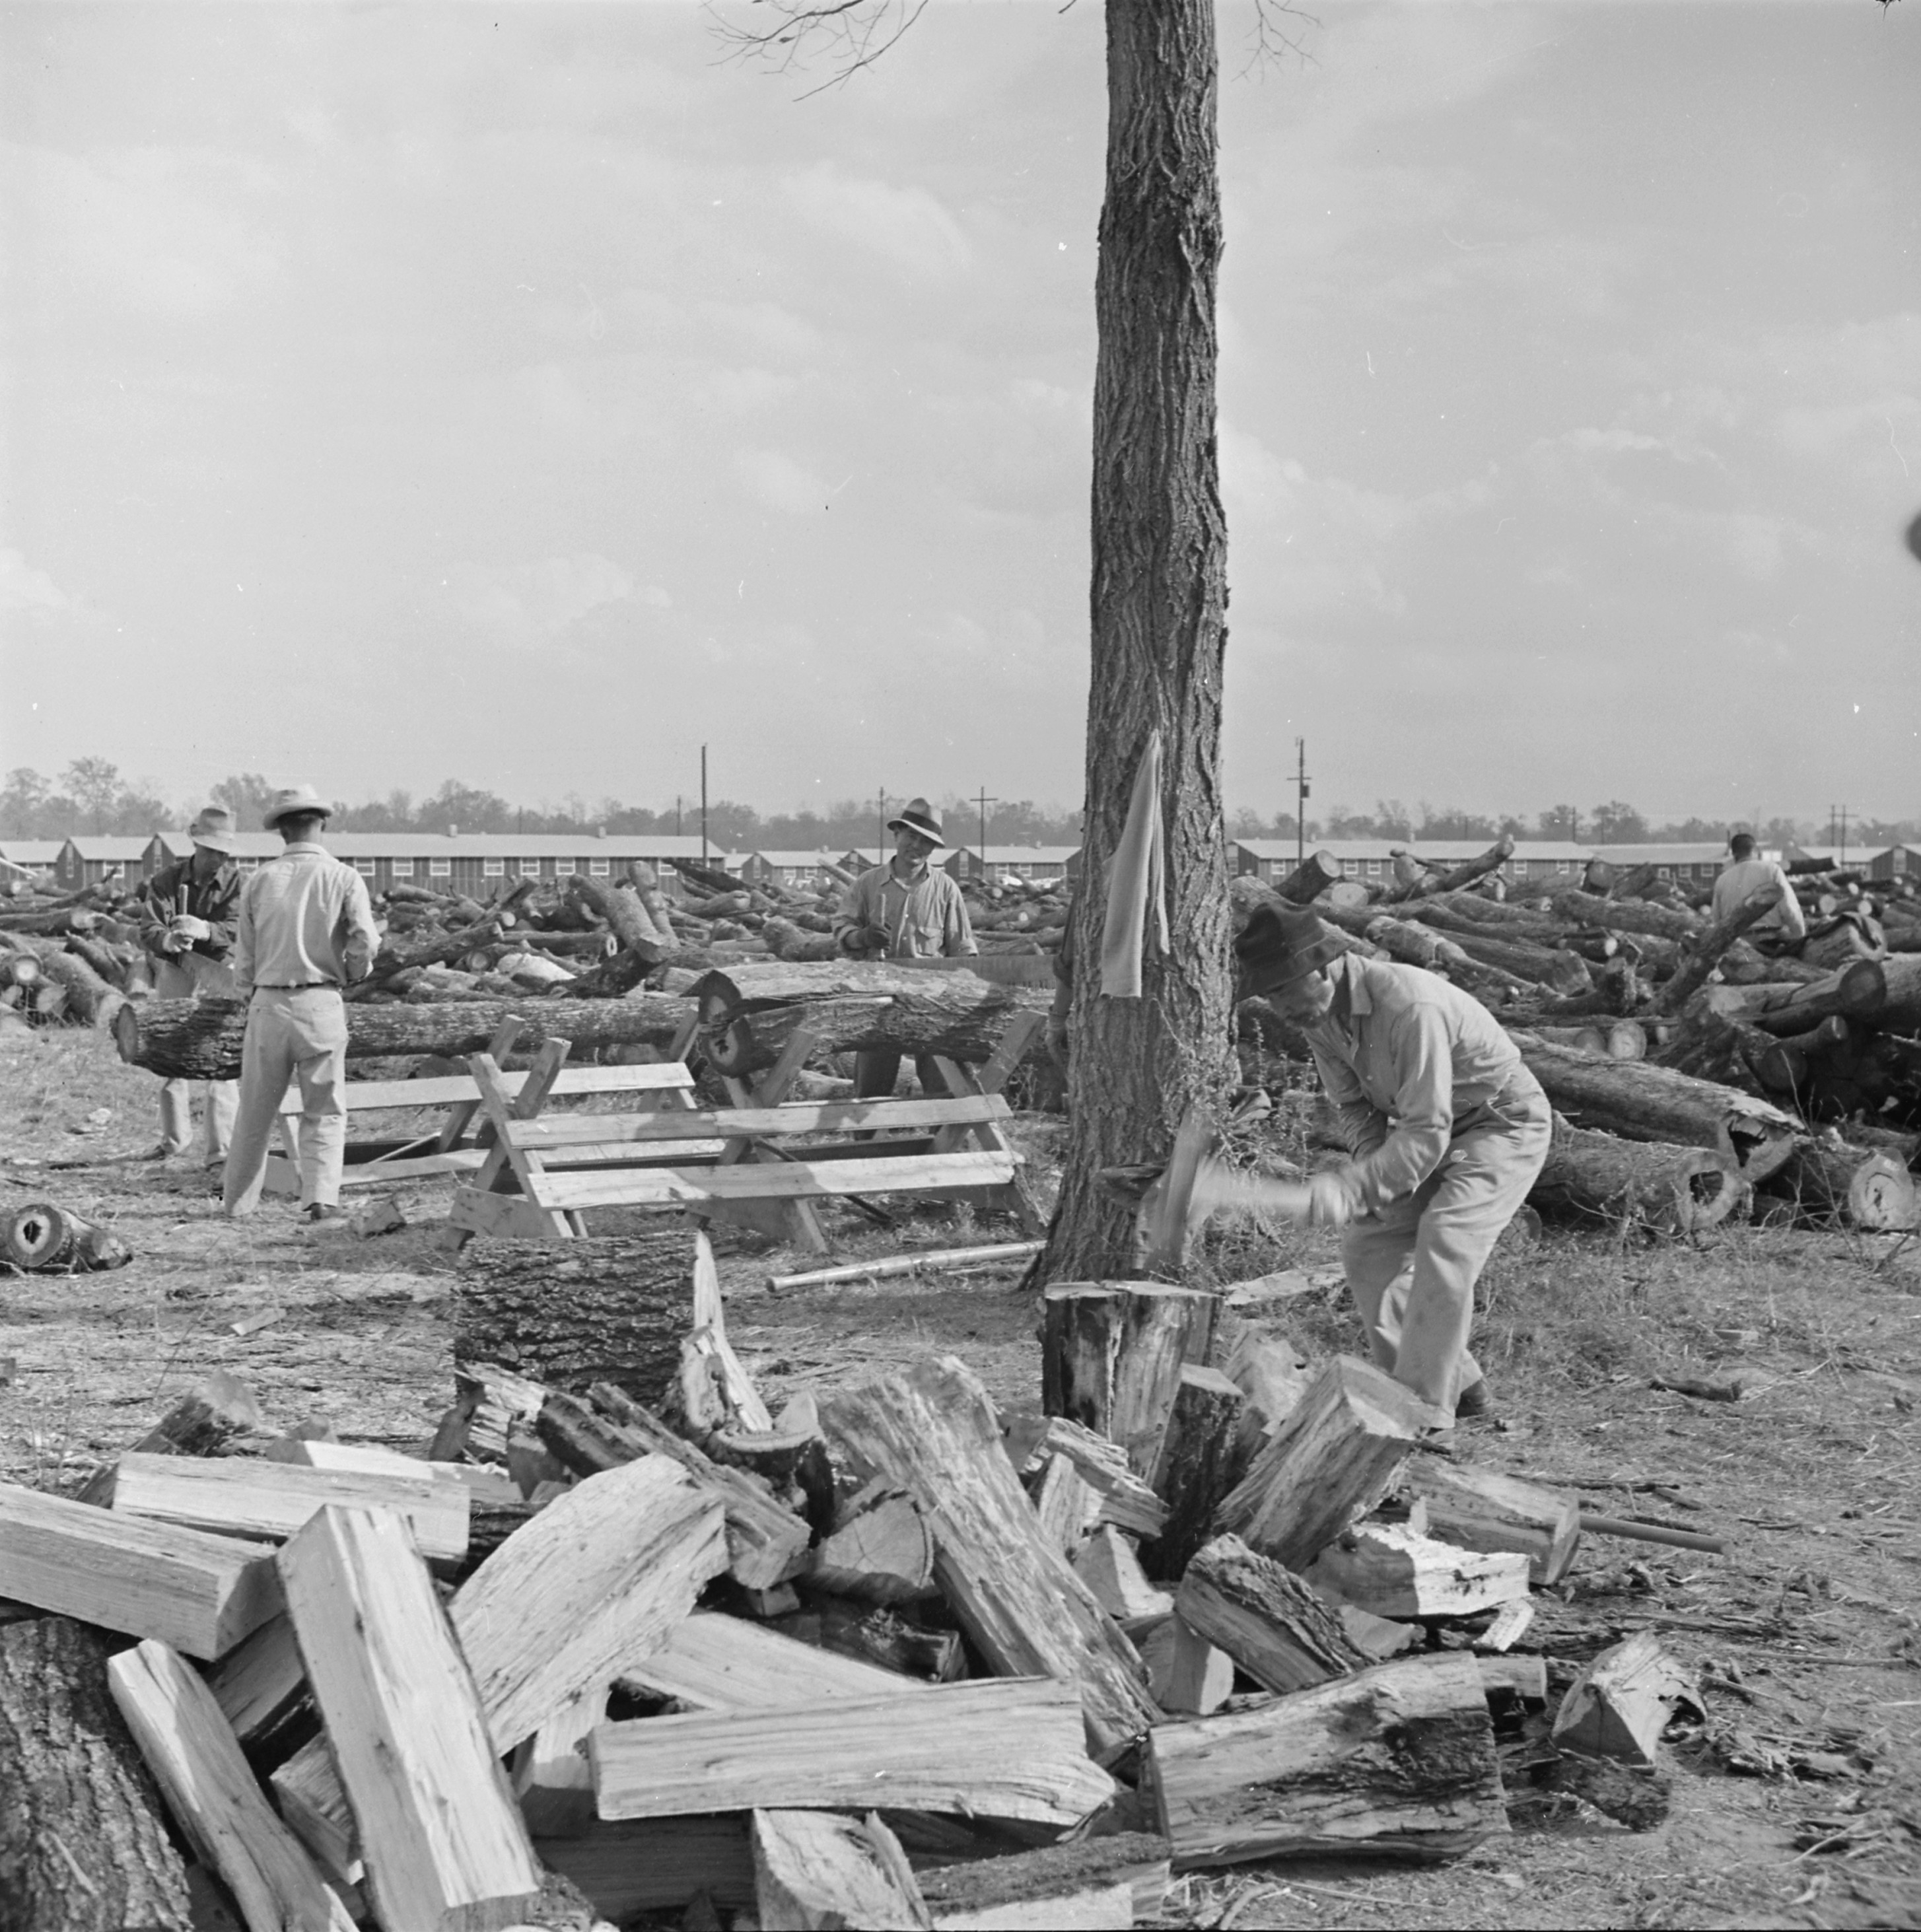 Woodcutting at Jerome War Relocation Center, Arkansas, United States, 17 Nov 1942, photo 1 of 2